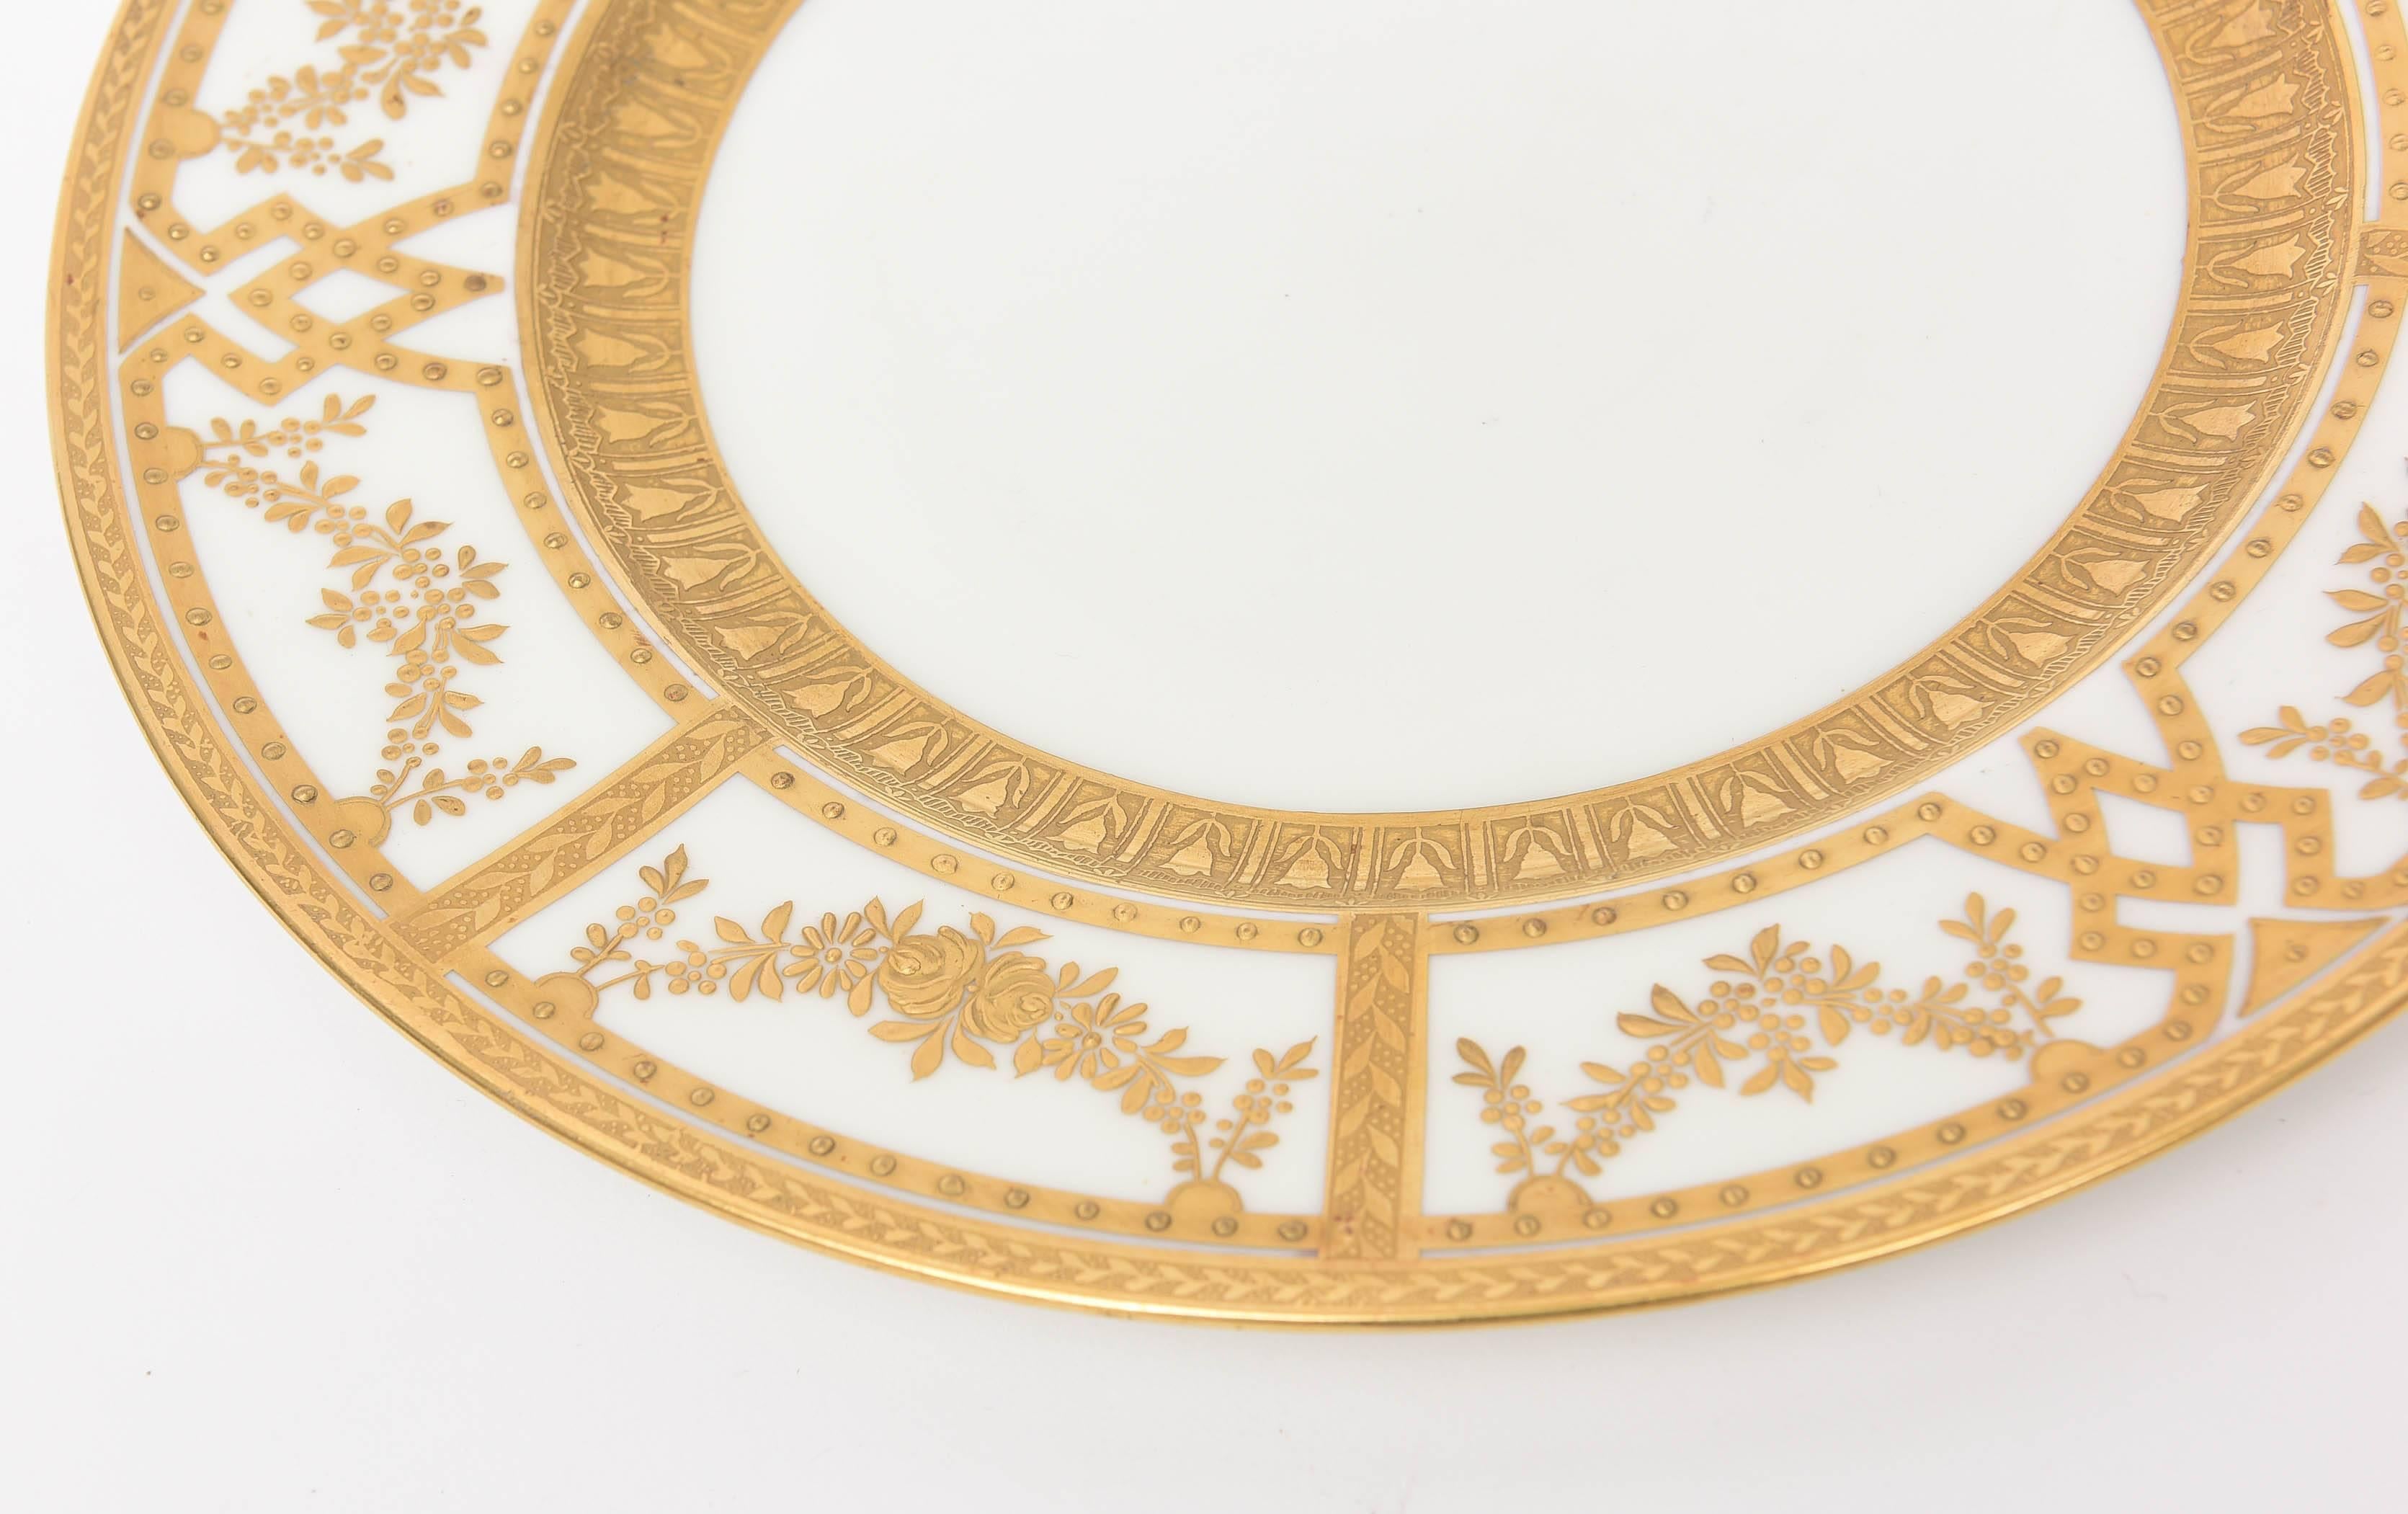 Hand-Crafted 12 Antique English Dinner Plates with Raised Tooled Gold, Hand Decorated